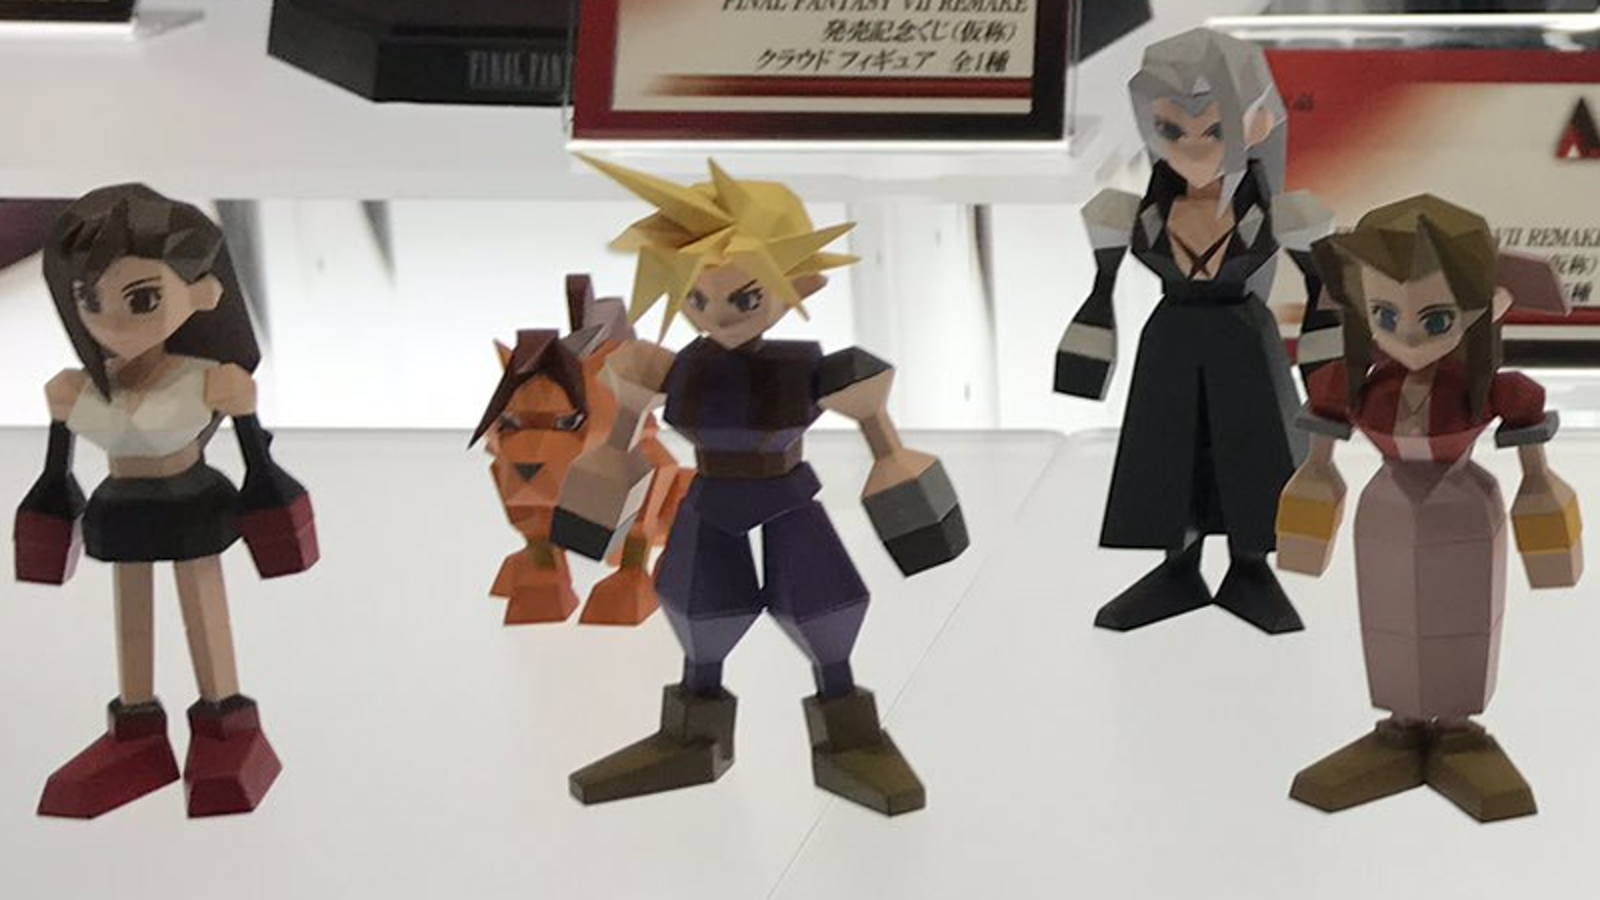 I Can't Stop Looking at These Perfect Final Fantasy VII Figures - Gizmodo thumbnail